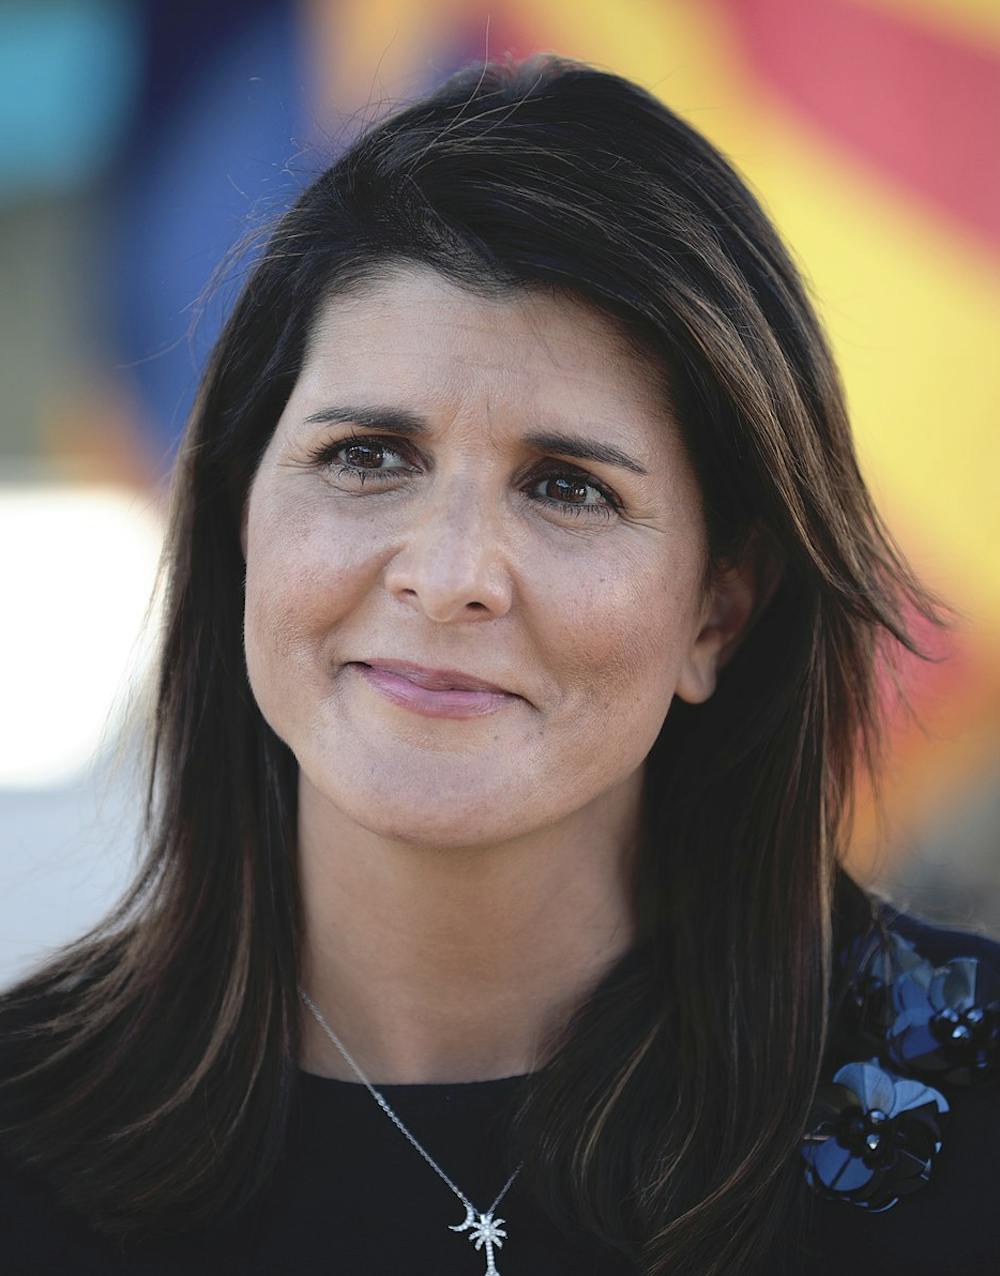 <p><em>Following her losses on Super Tuesday, Haley announced on March 6 that she was suspending her campaign (Photo courtesy of </em><a href="https://commons.wikimedia.org/wiki/File:Nikki_Haley_by_Gage_Skidmore_4.jpg" target=""><em>Wikimedia Commons</em></a><em> / Gage Skidmore. Oct. 12, 2020). </em></p>